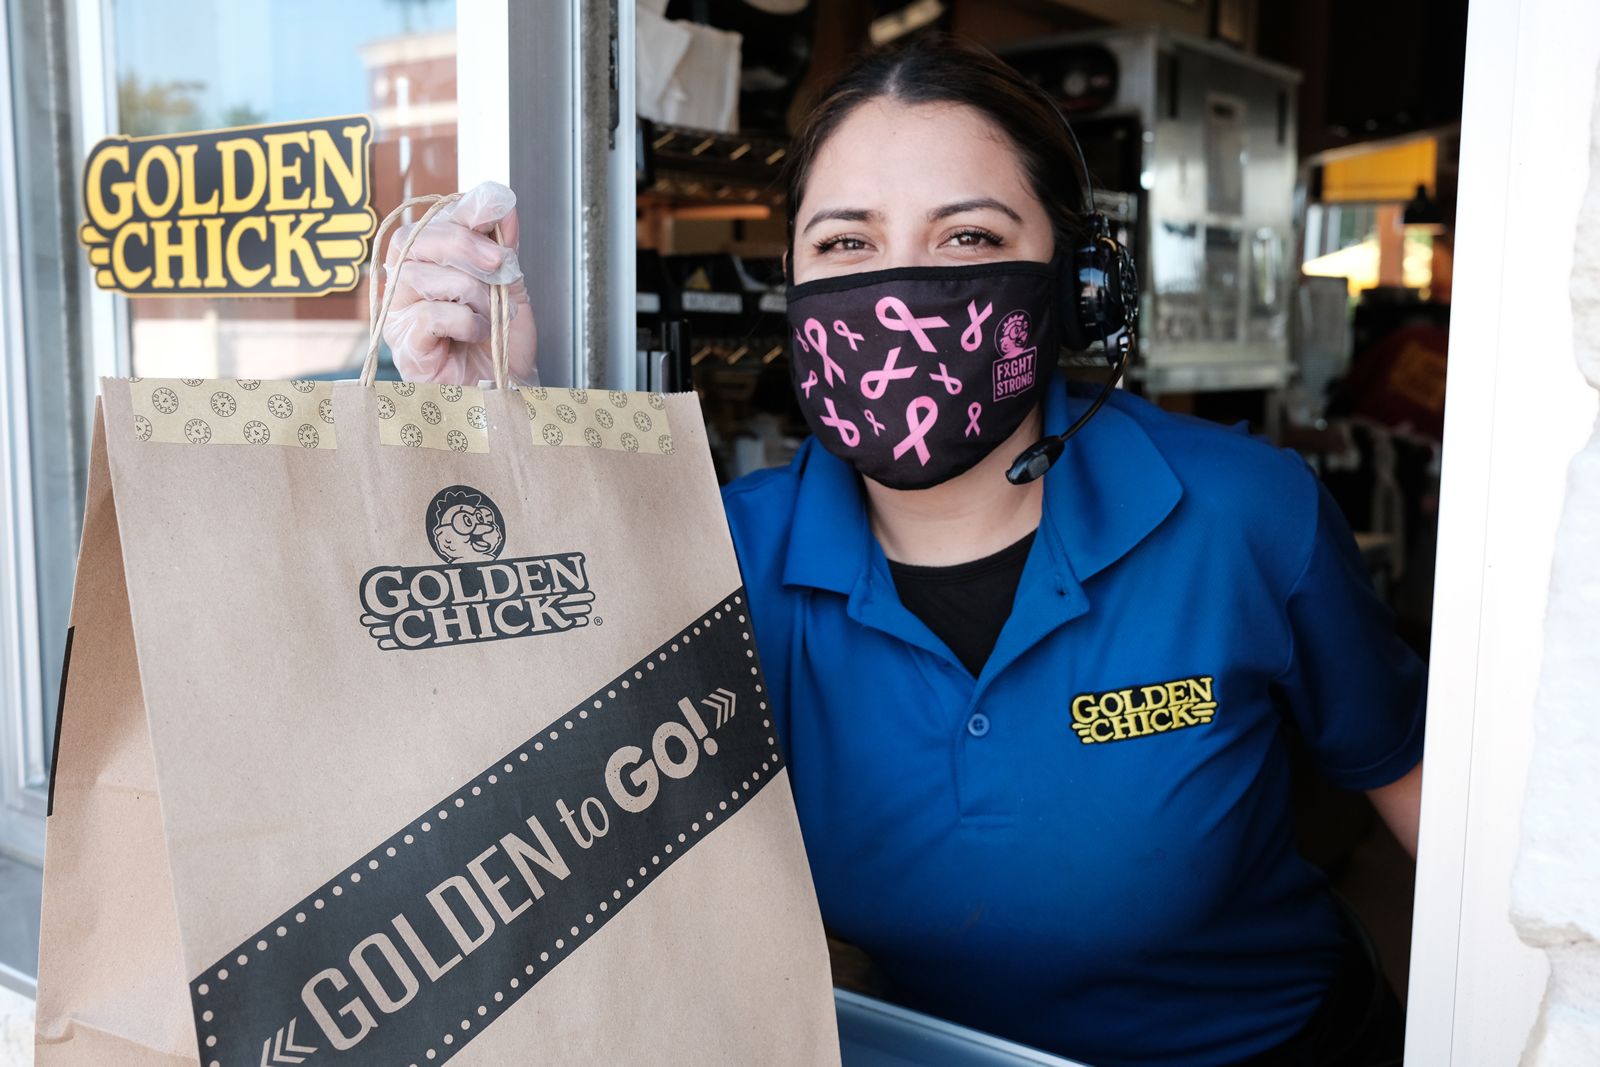 Golden Chick Donates $15,040 To The National Breast Cancer Foundation